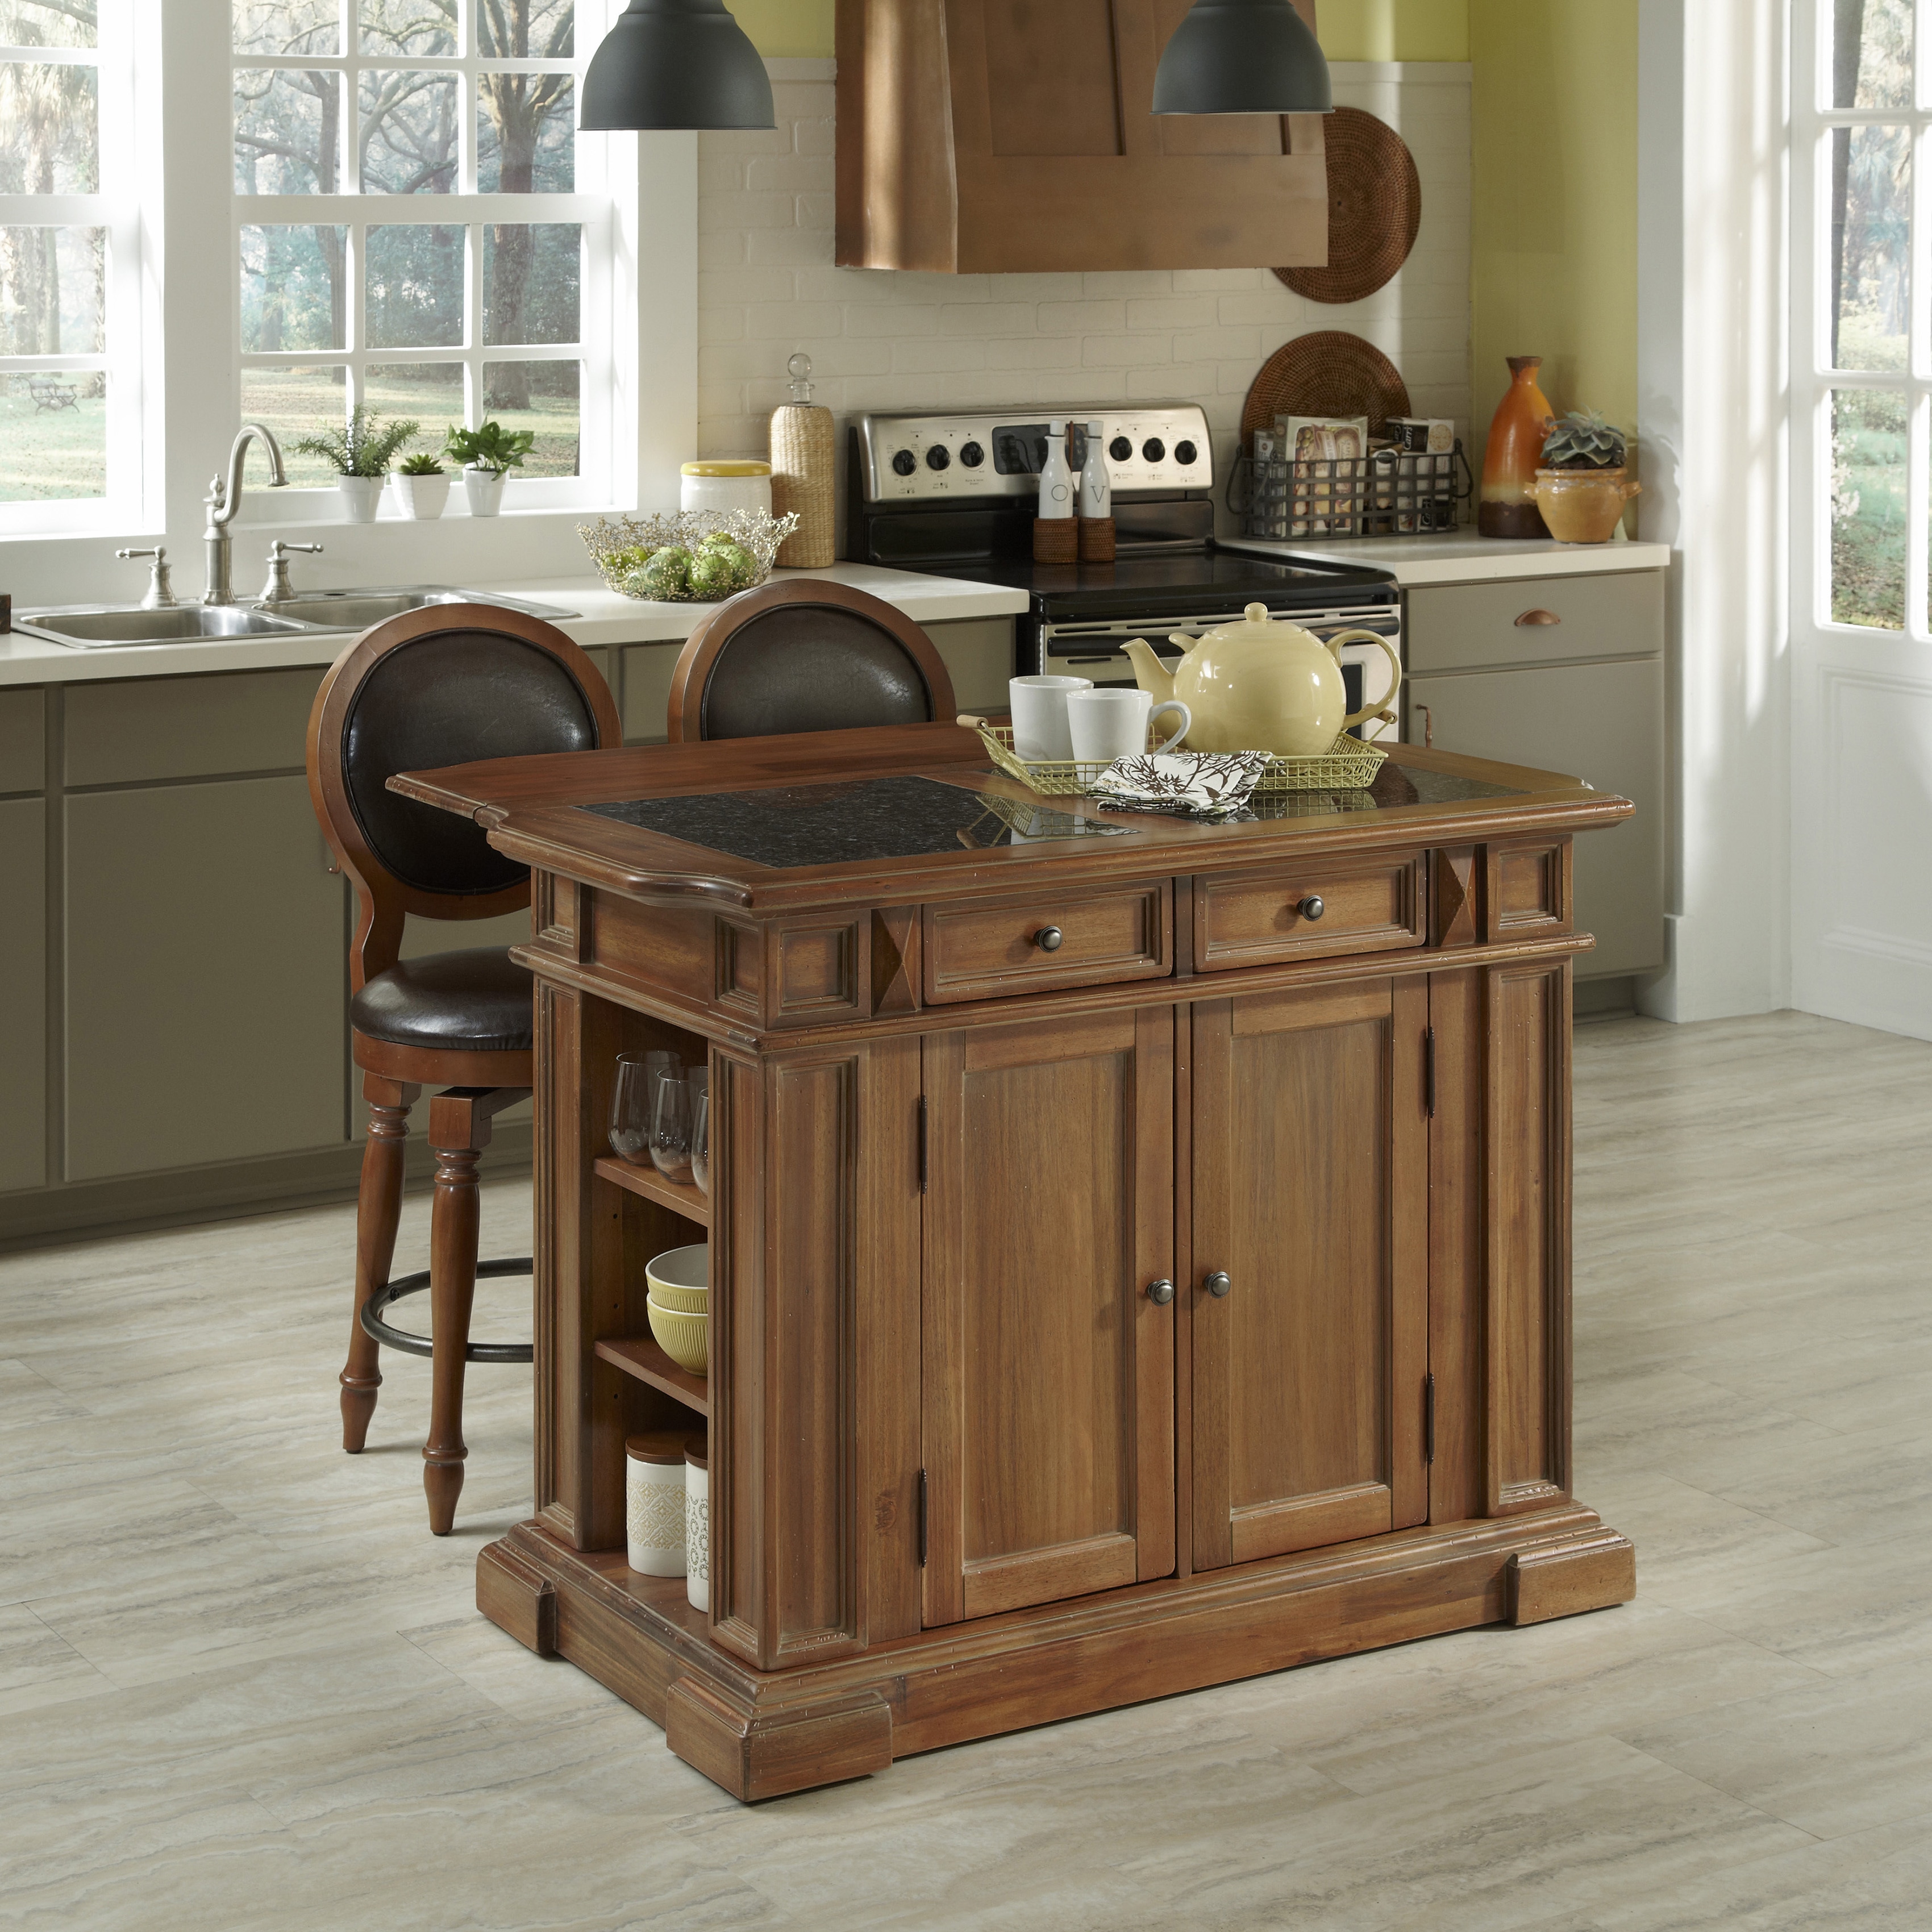 Americana Vintage Kitchen Island And Two Stools By Home Styles Overstock 9270108